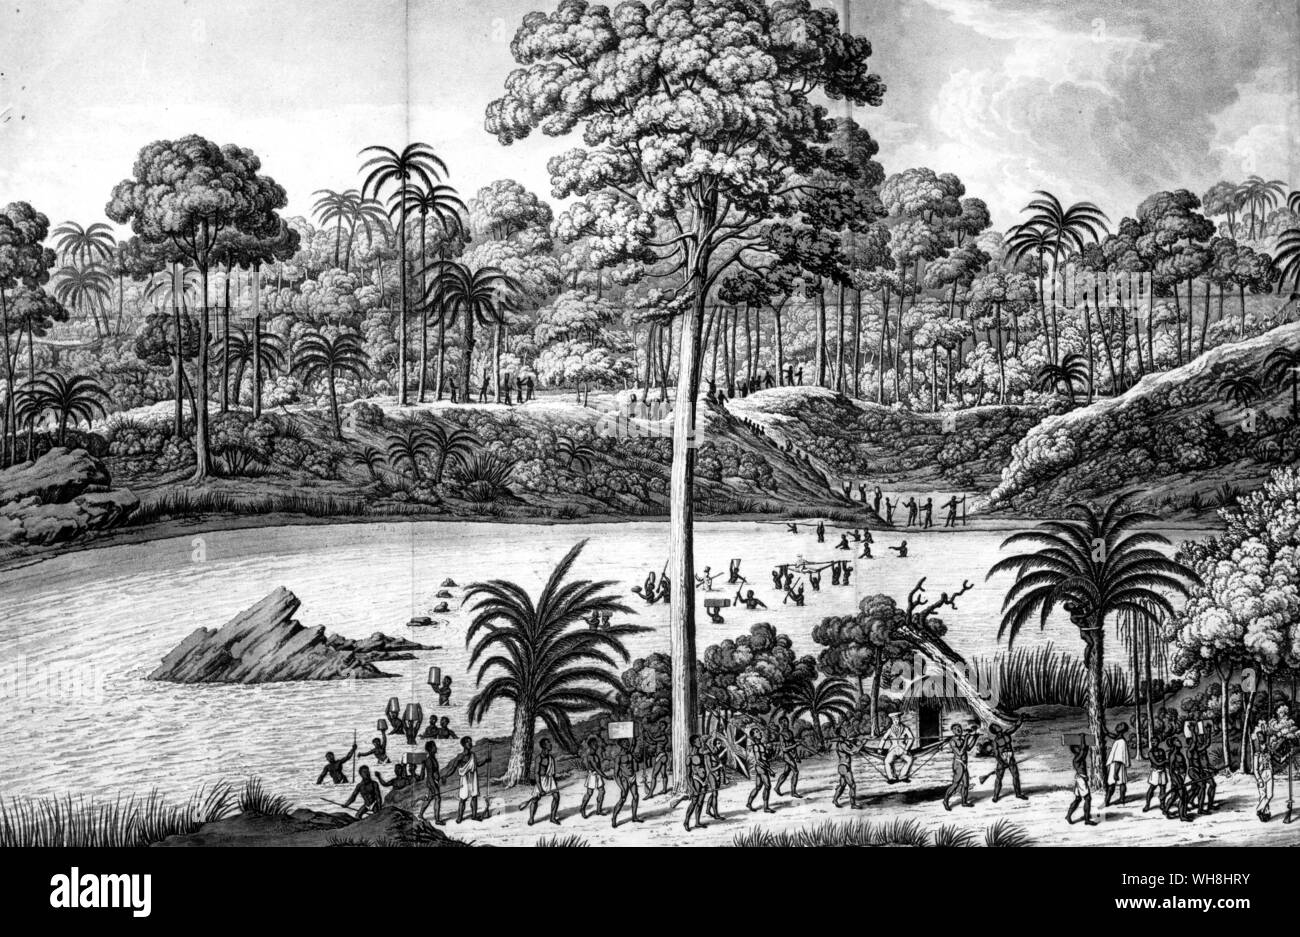 Explorers on the march. 'A South prospect of the River Praa and the Forest of Assin'. The African Adventure - A History of Africa's Explorers by Timothy Severin page 22. Stock Photo